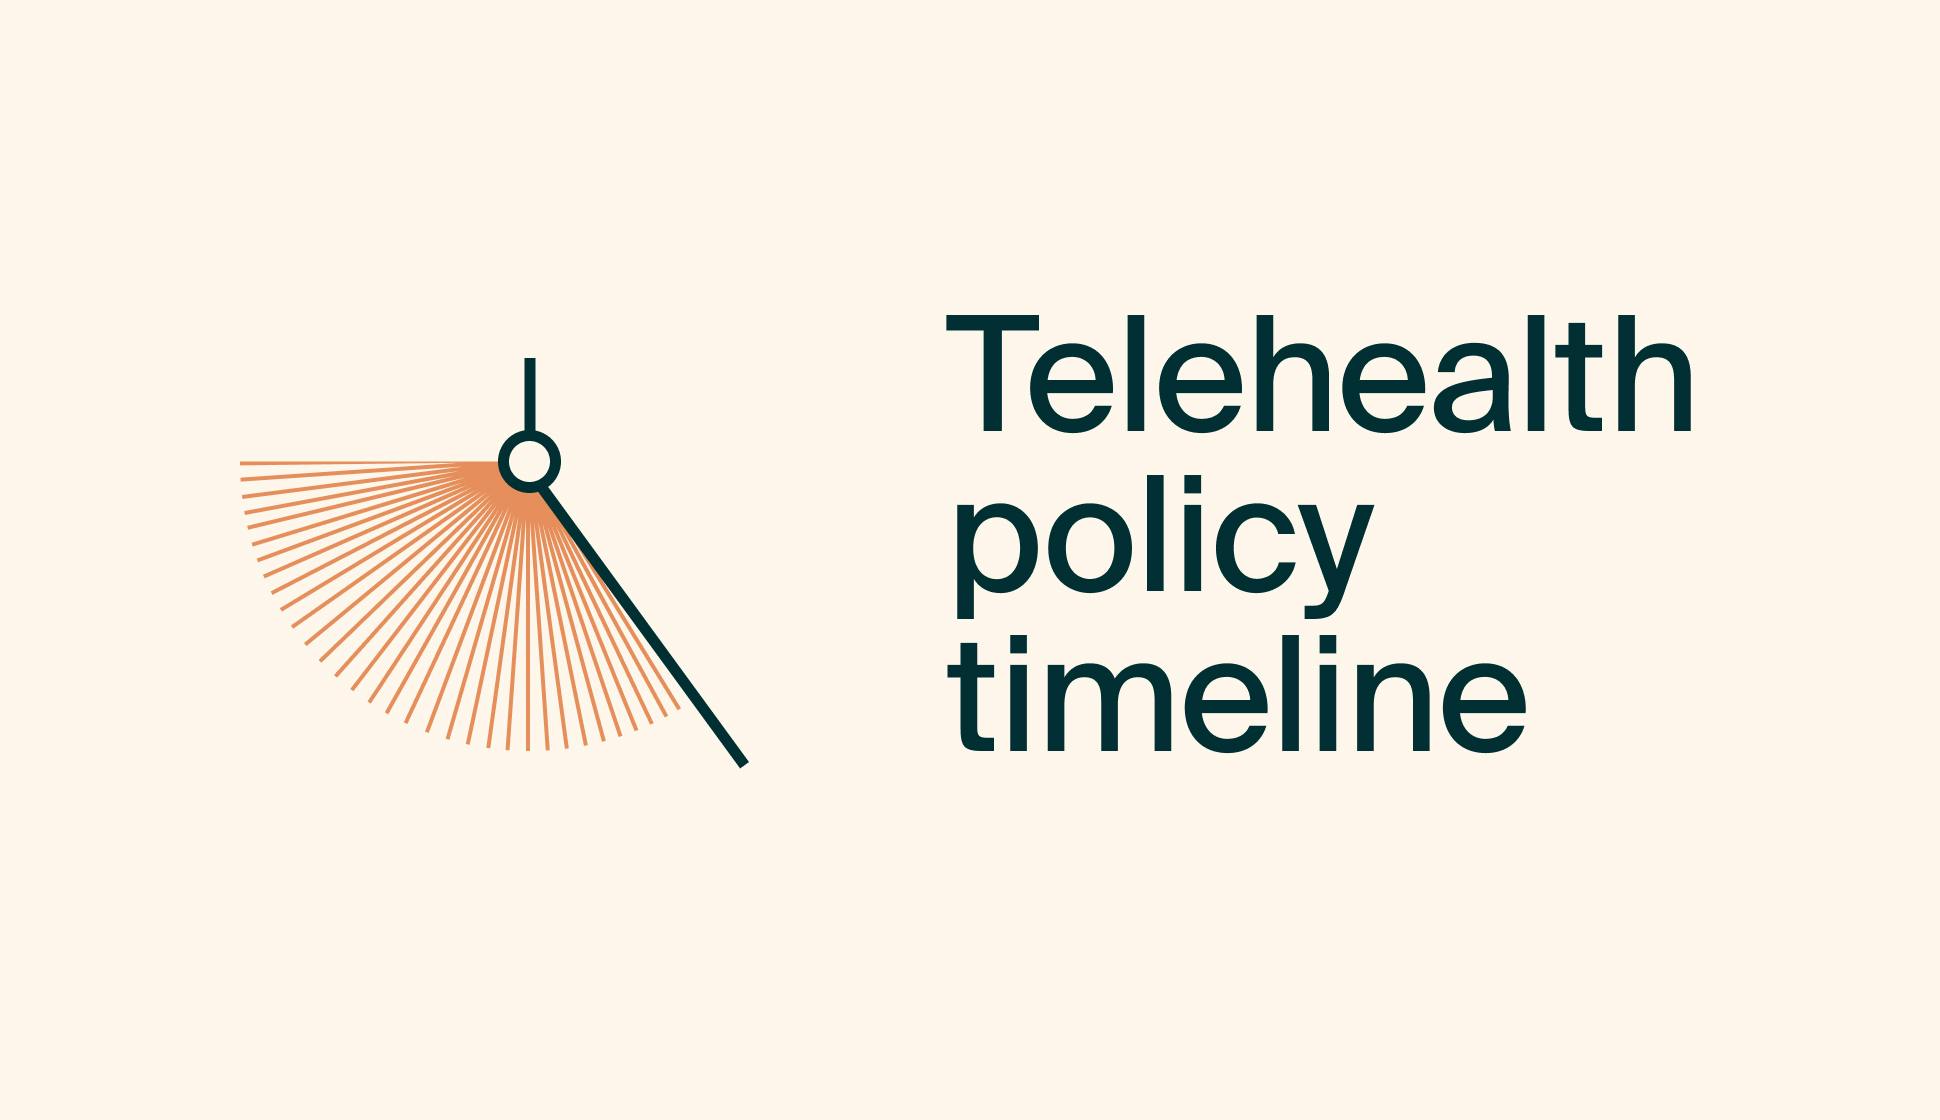 United States telehealth policy timeline